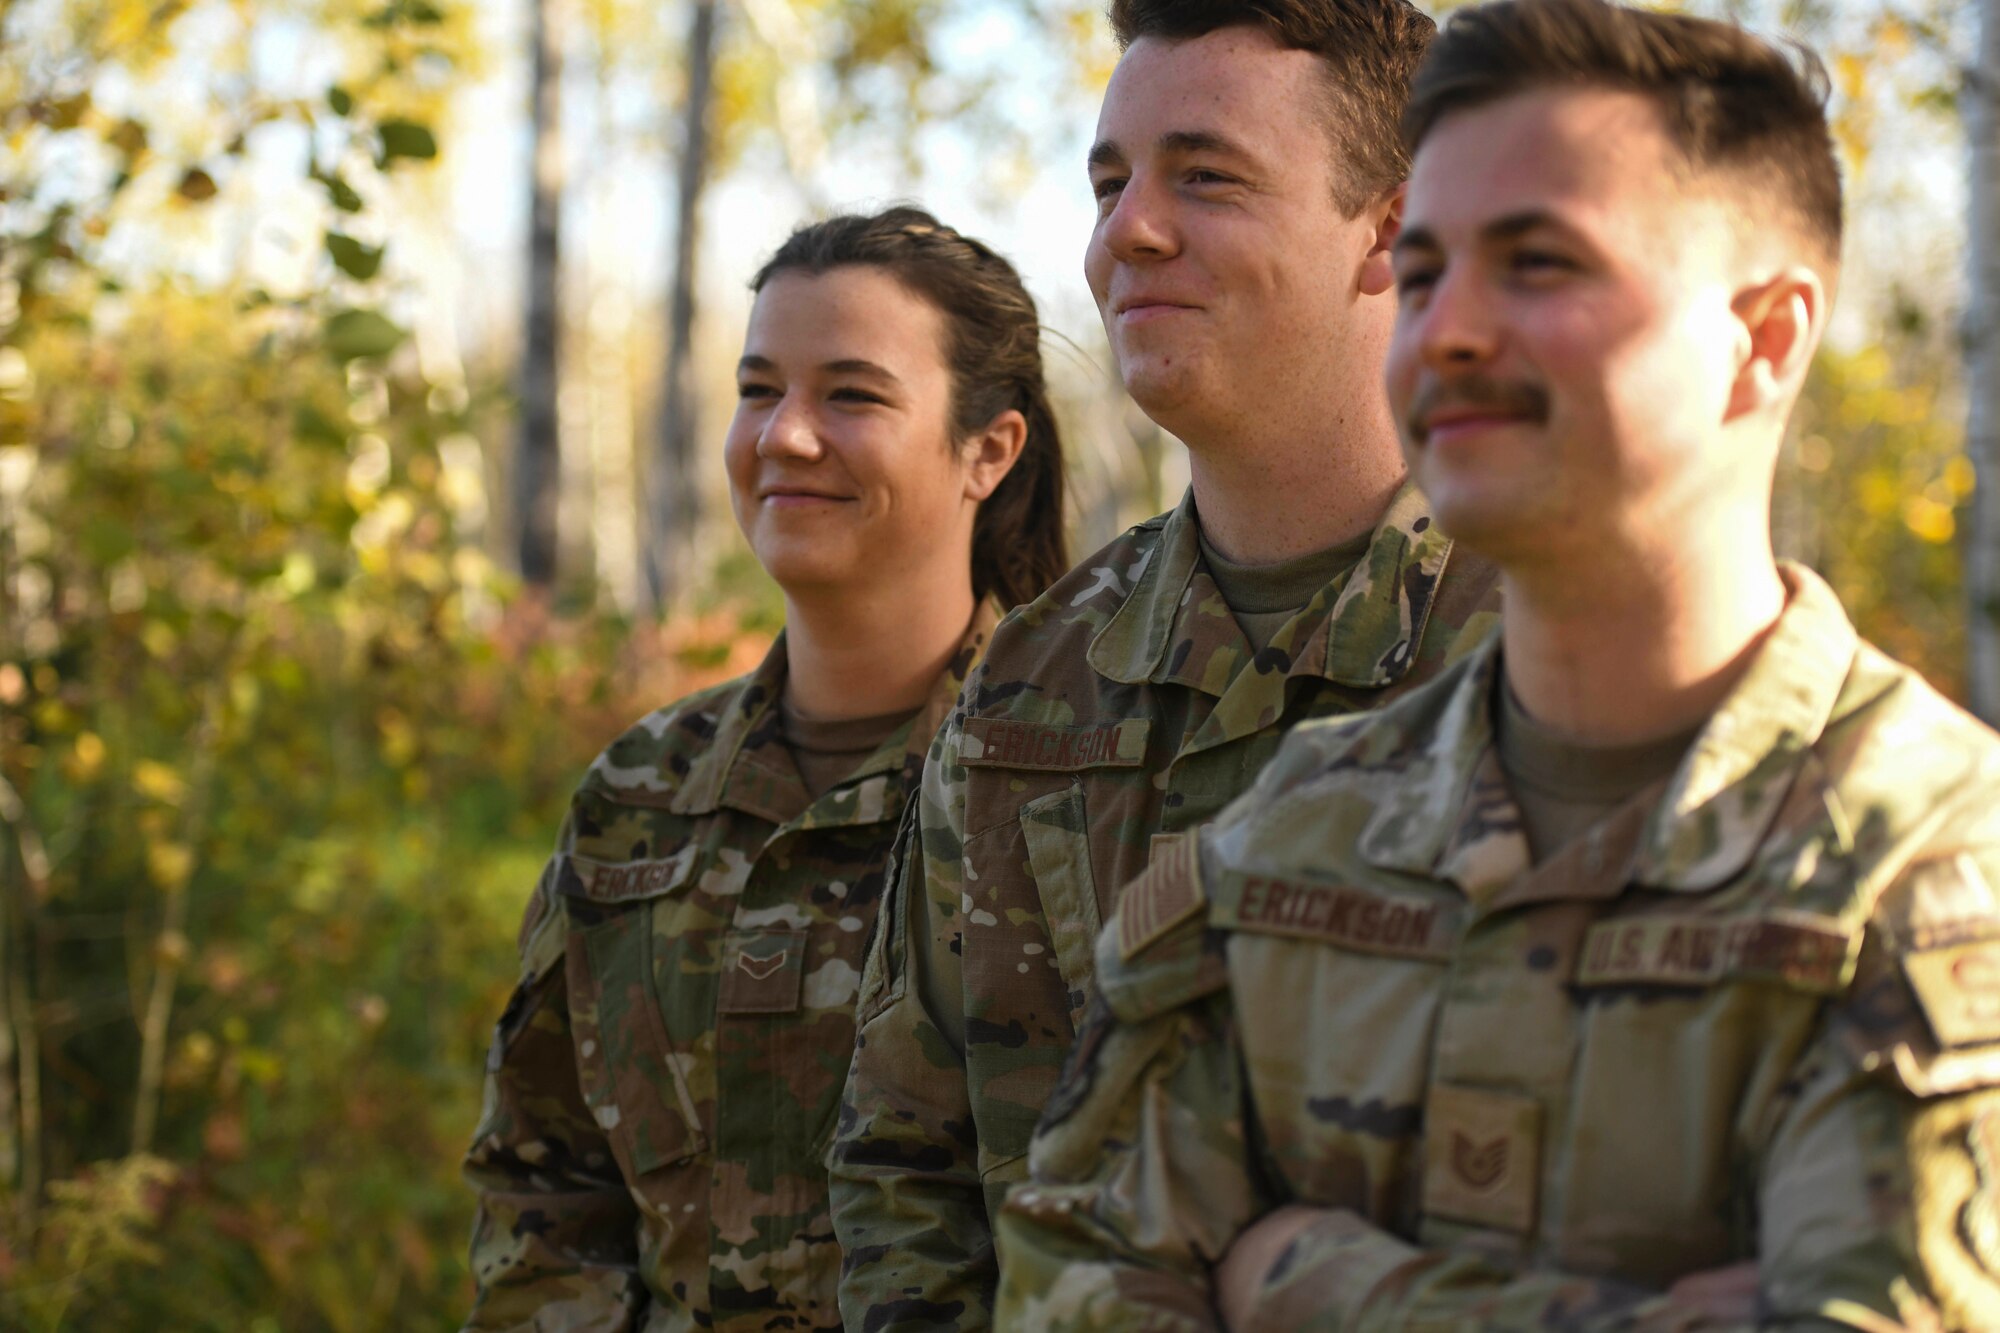 Tech. Sgt. Reid Erickson, Staff Sgt. Caden Erickson and Airman 1st Class Rylie Erickson pose for a picture, Oct. 7, 2022. The three siblings are all members of the 148th Fighter Wing and have deployed overseas in the past year.